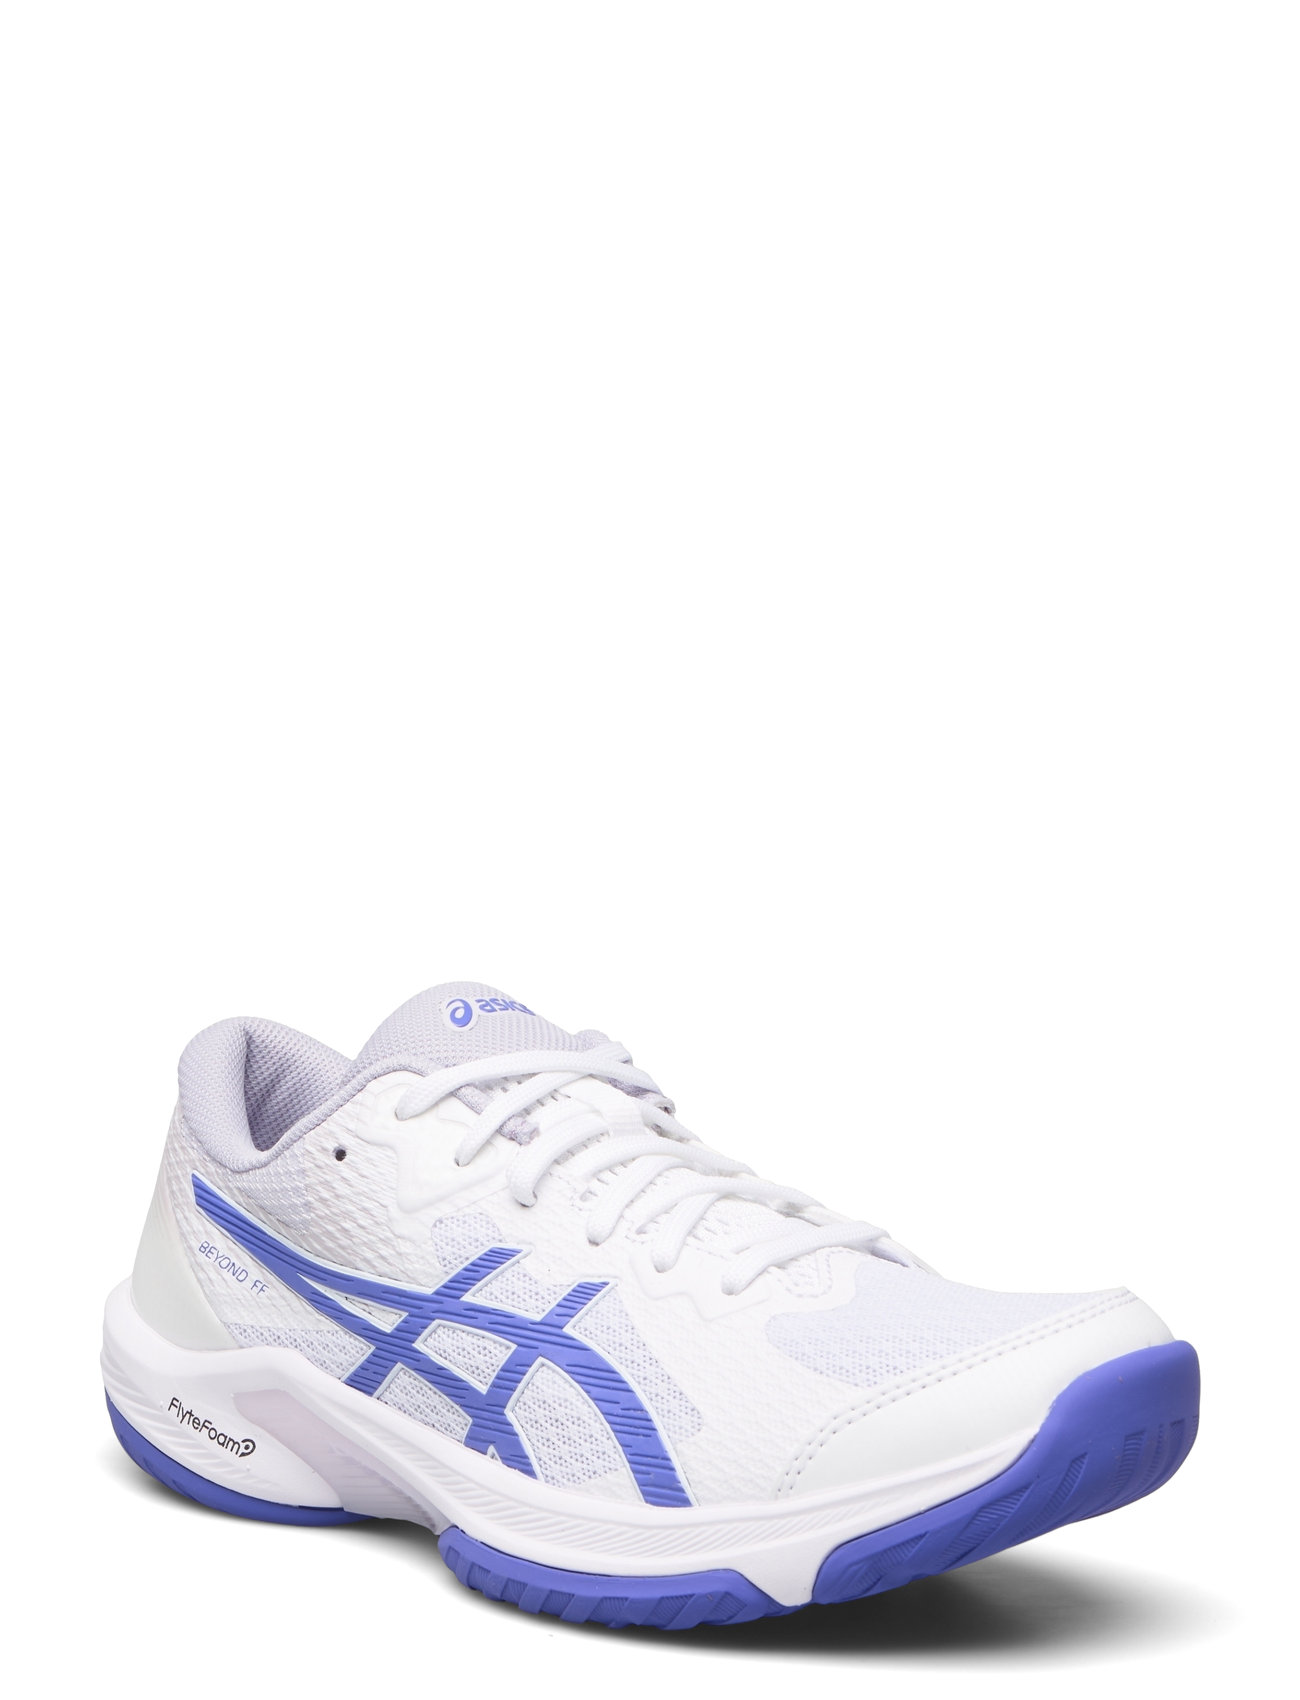 Beyond Ff Sport Sport Shoes Indoor Sports Shoes White Asics